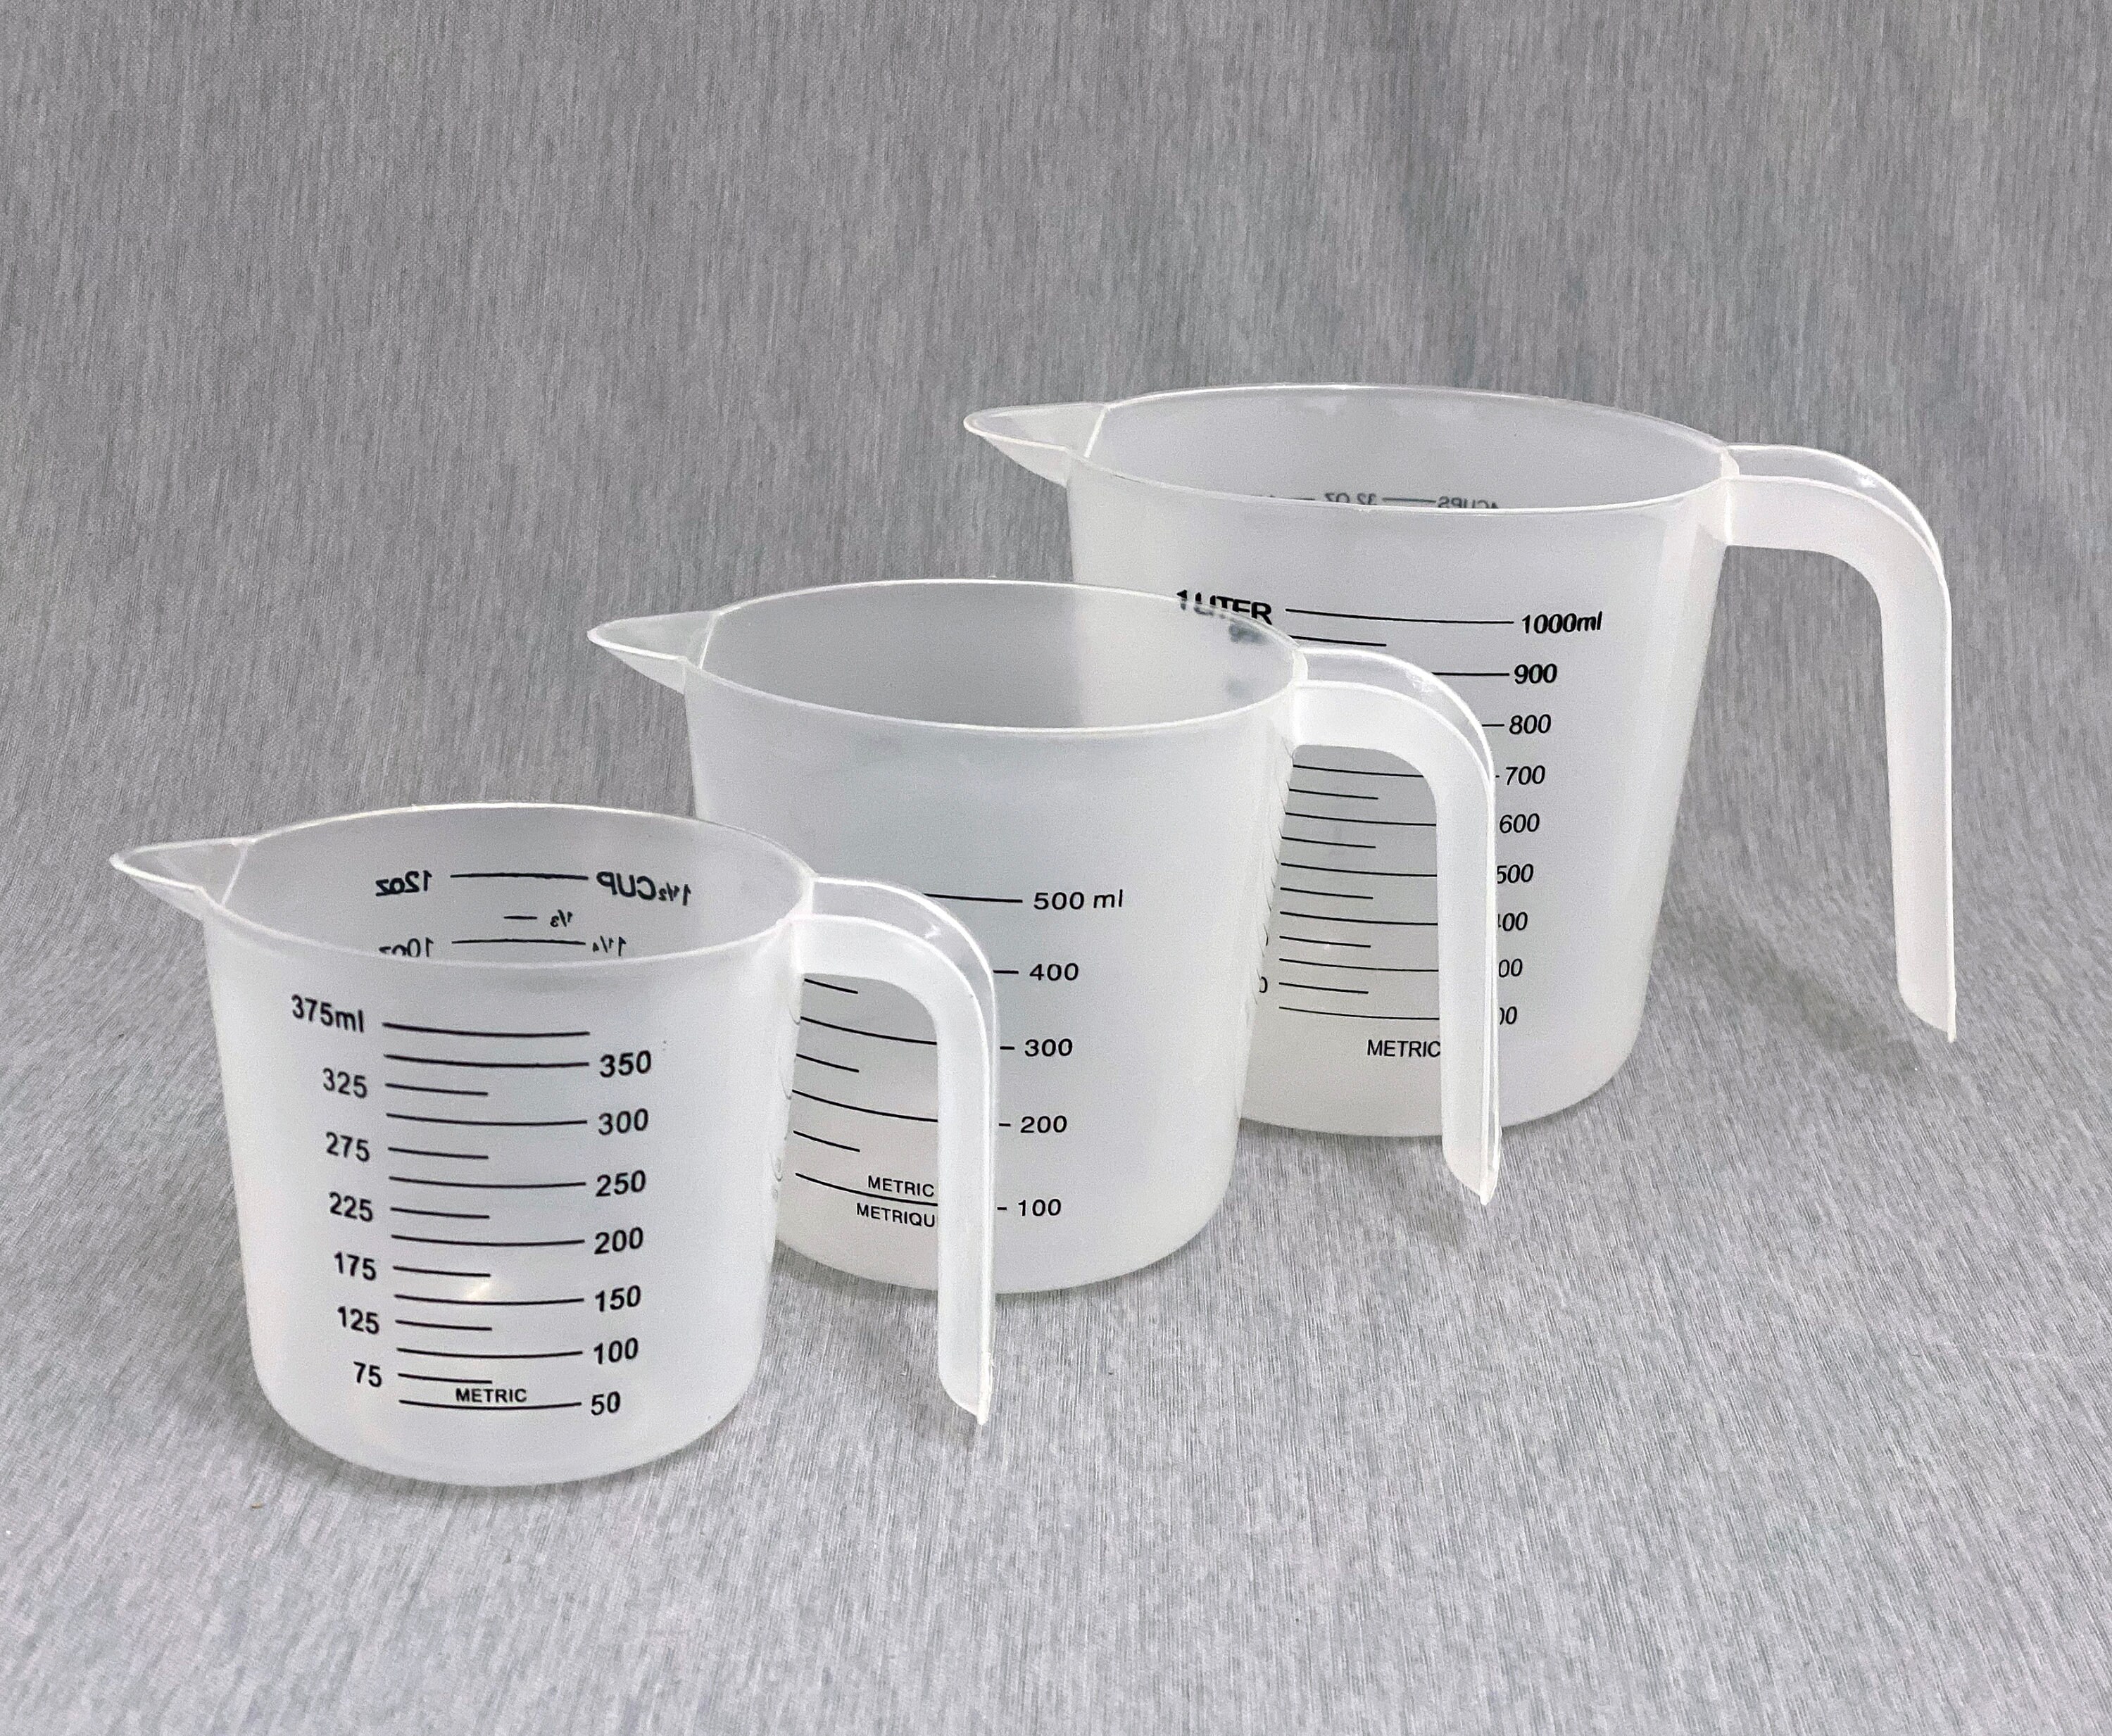 Kanayu 6 Pcs Plastic Measuring Cup Set Includes 4 Cup 2 Cup 1 Cup